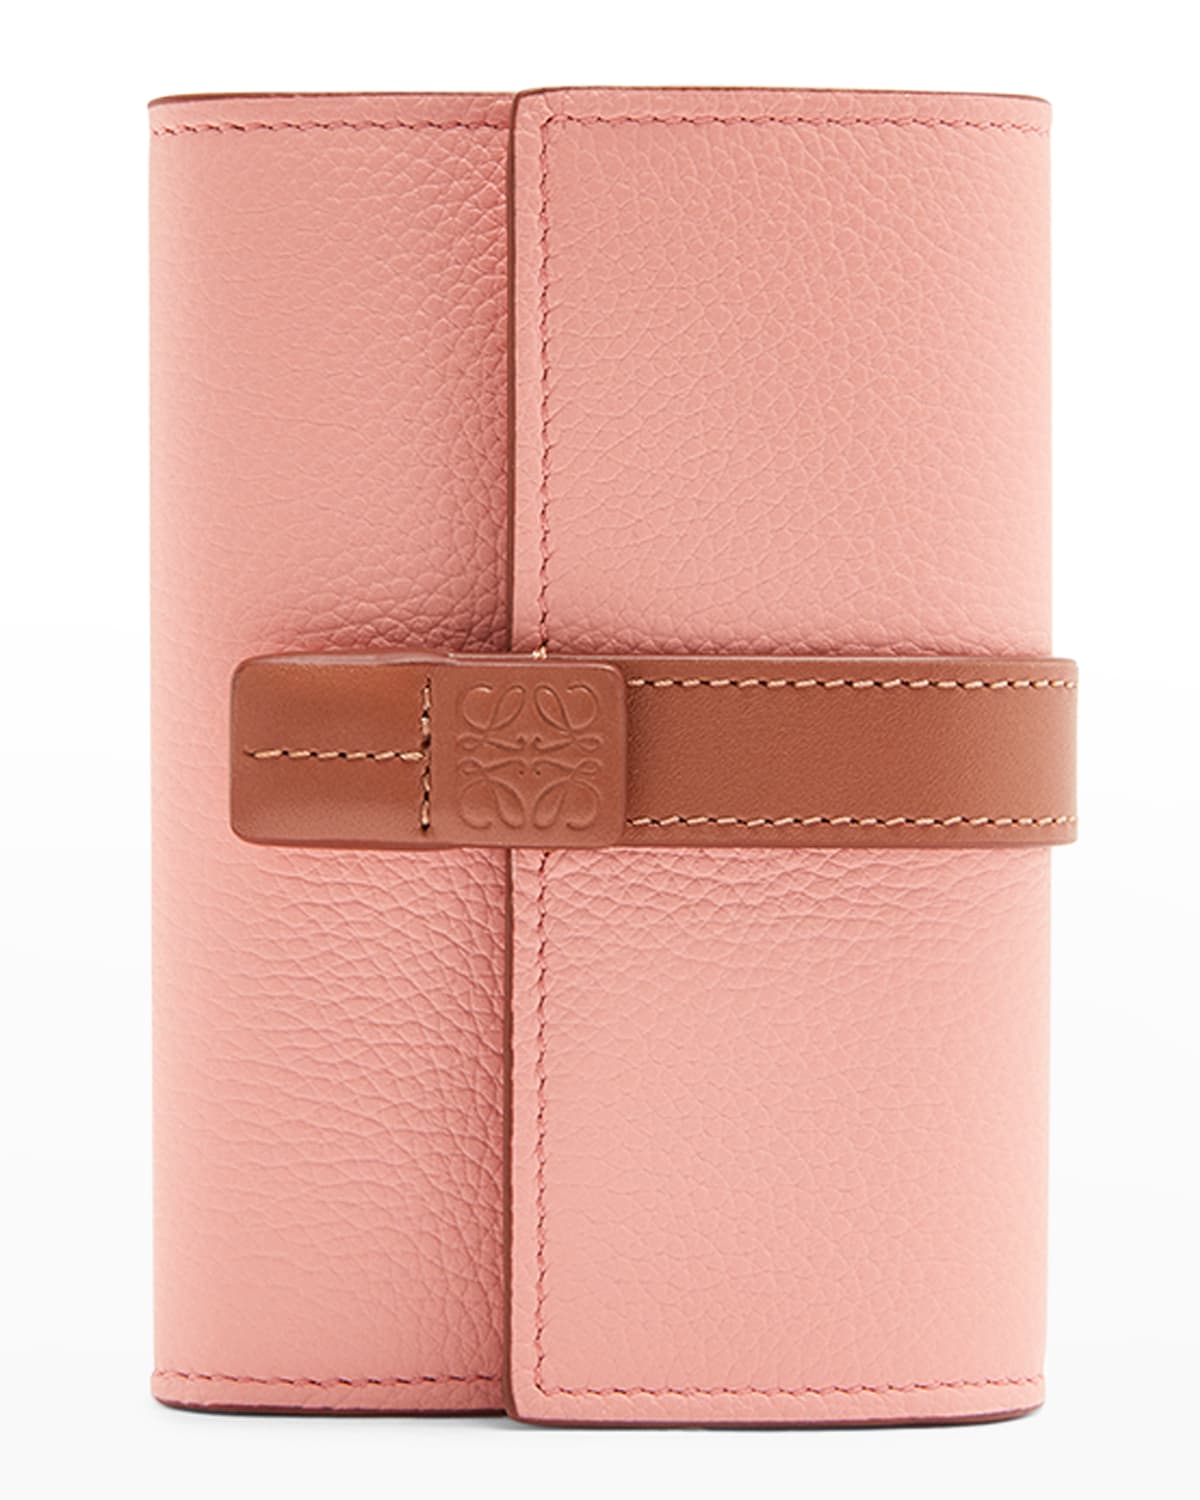 LOEWE SMALL TRIFOLD FLAP LEATHER WALLET